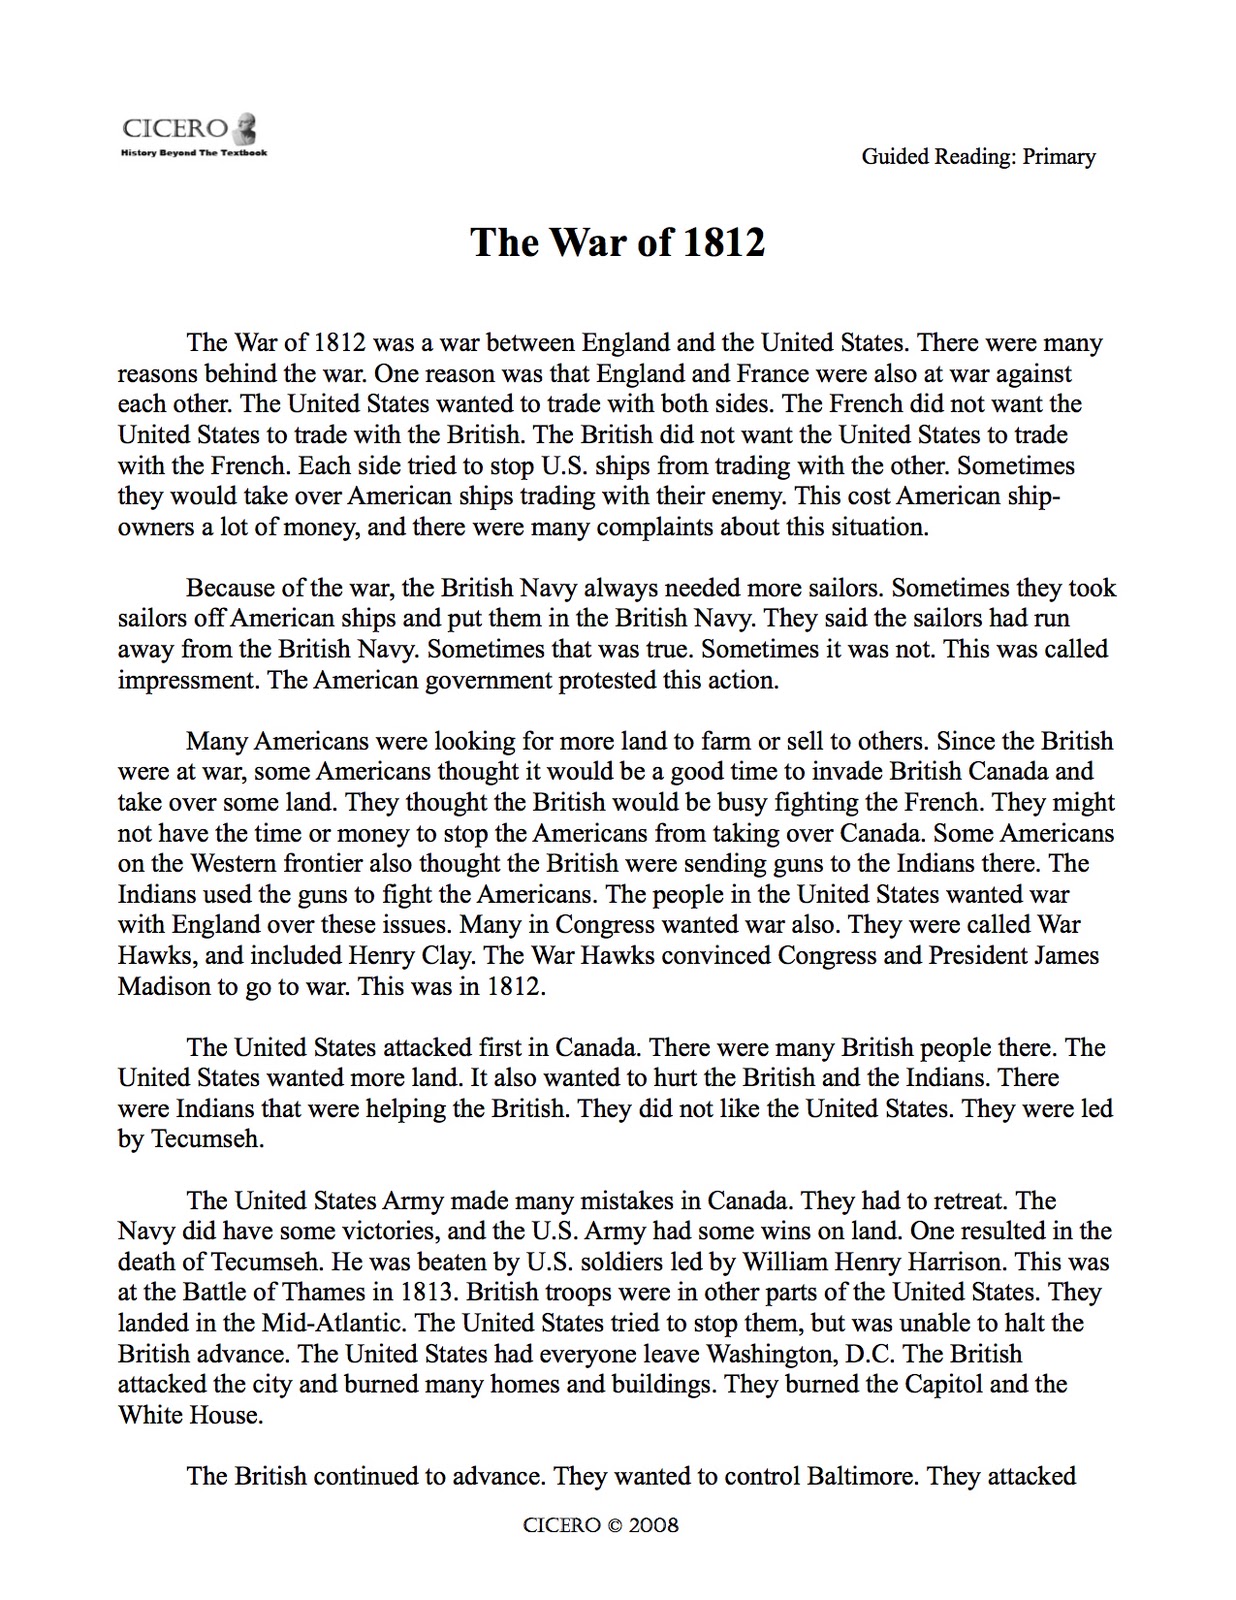 War of 1812 cause and effect essay